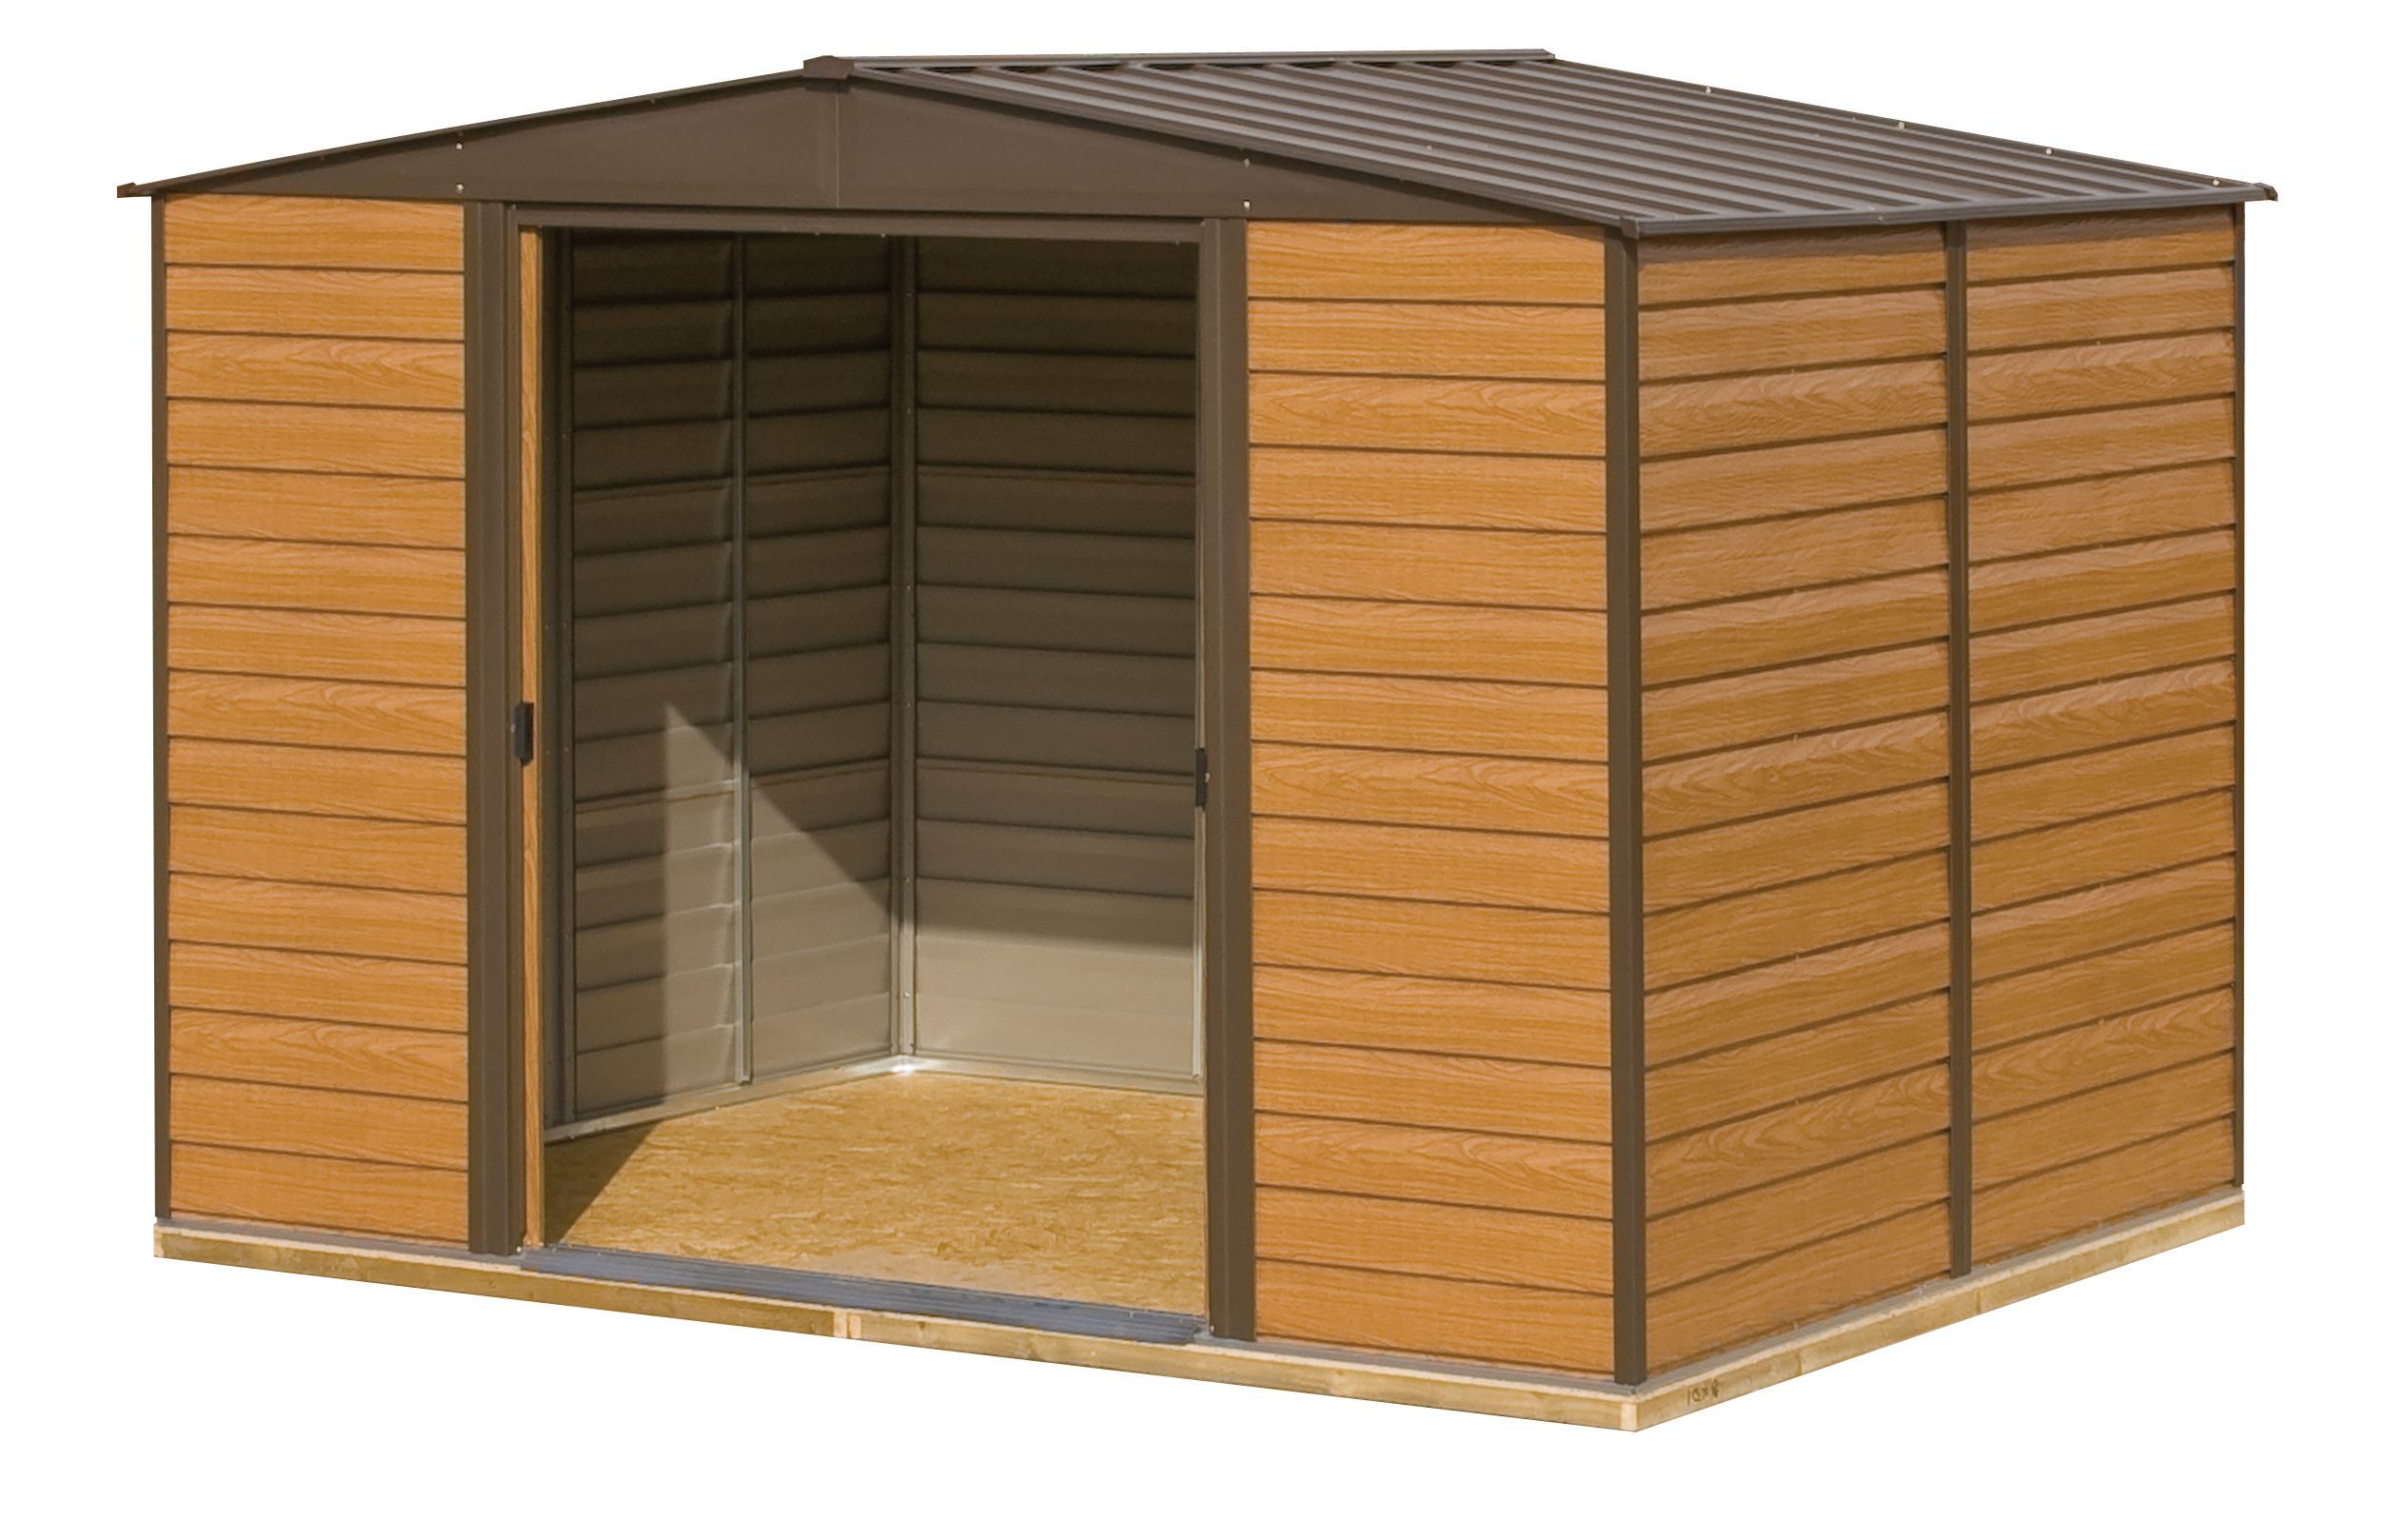 Rowlinson Woodvale Large Double Door Metal Apex Shed including Floor - 10 x 12ft